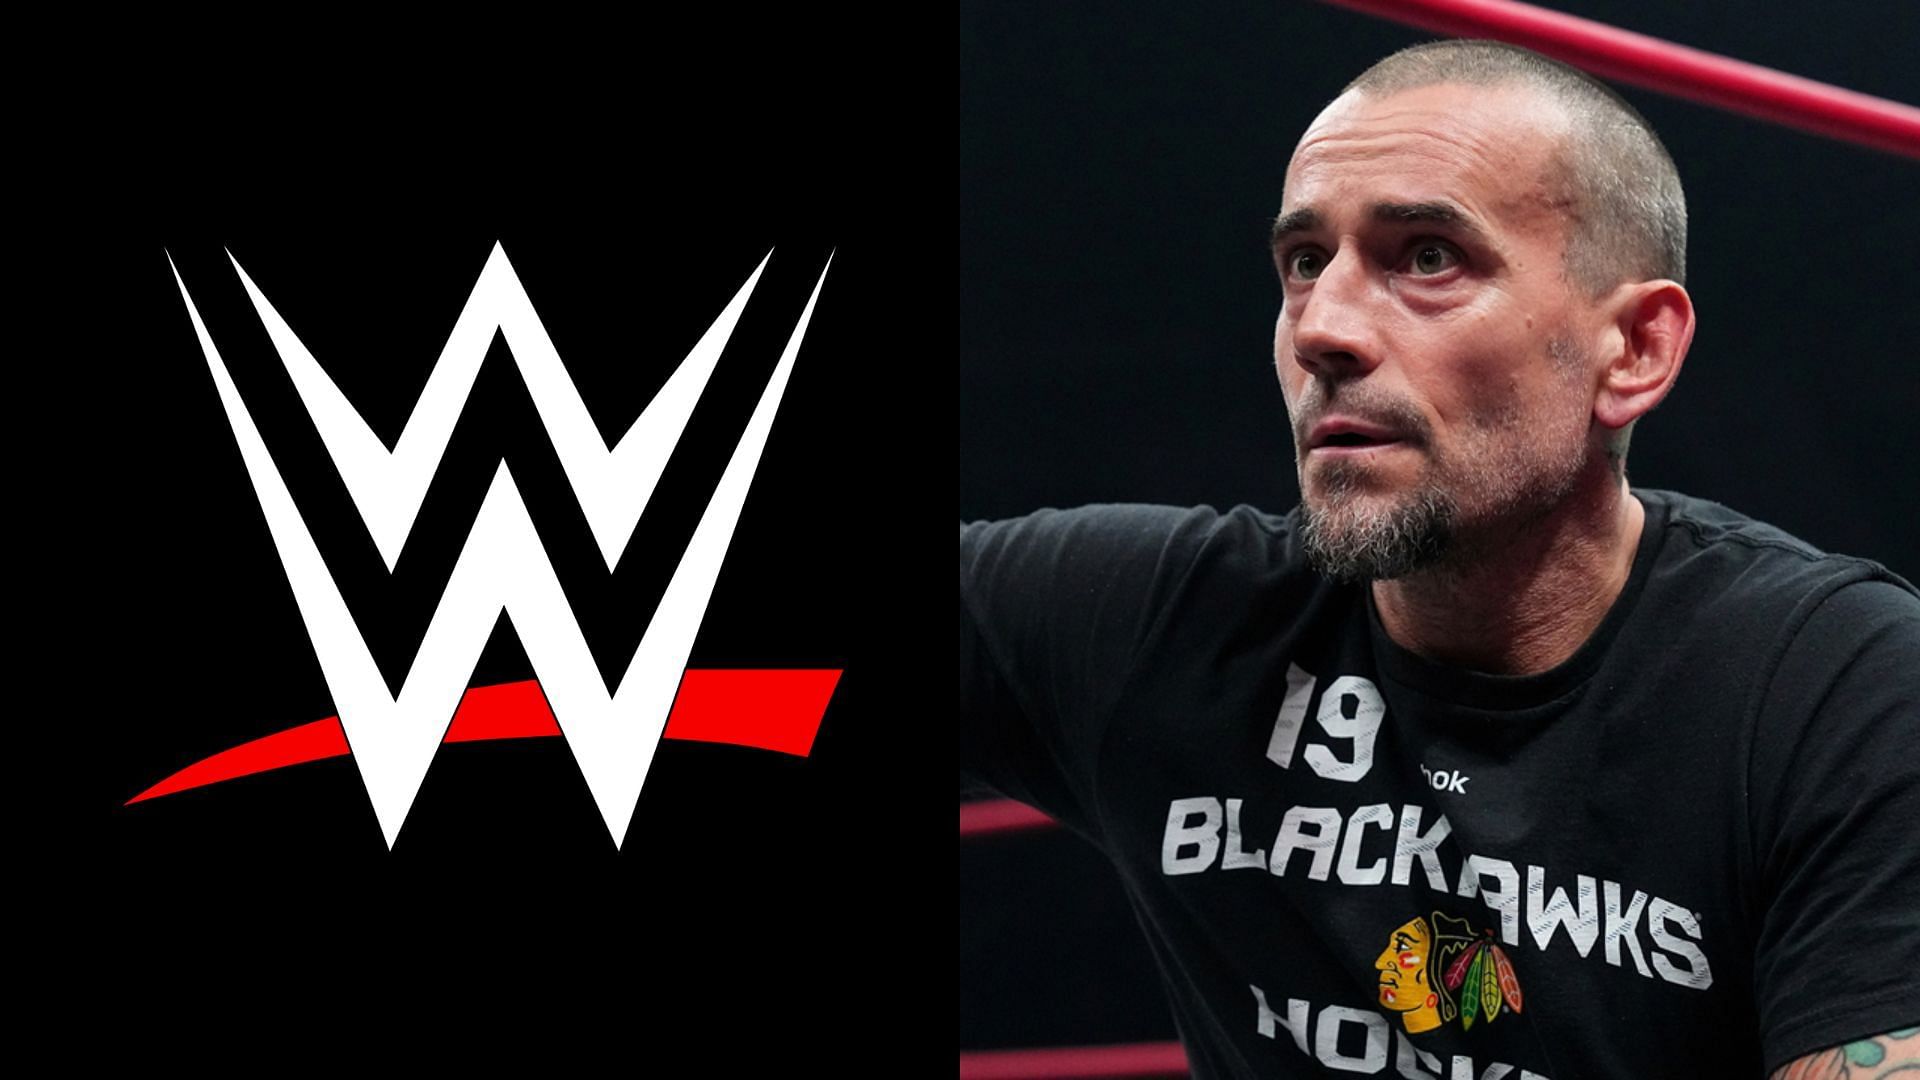 Could this lead to serious consequences for CM Punk?